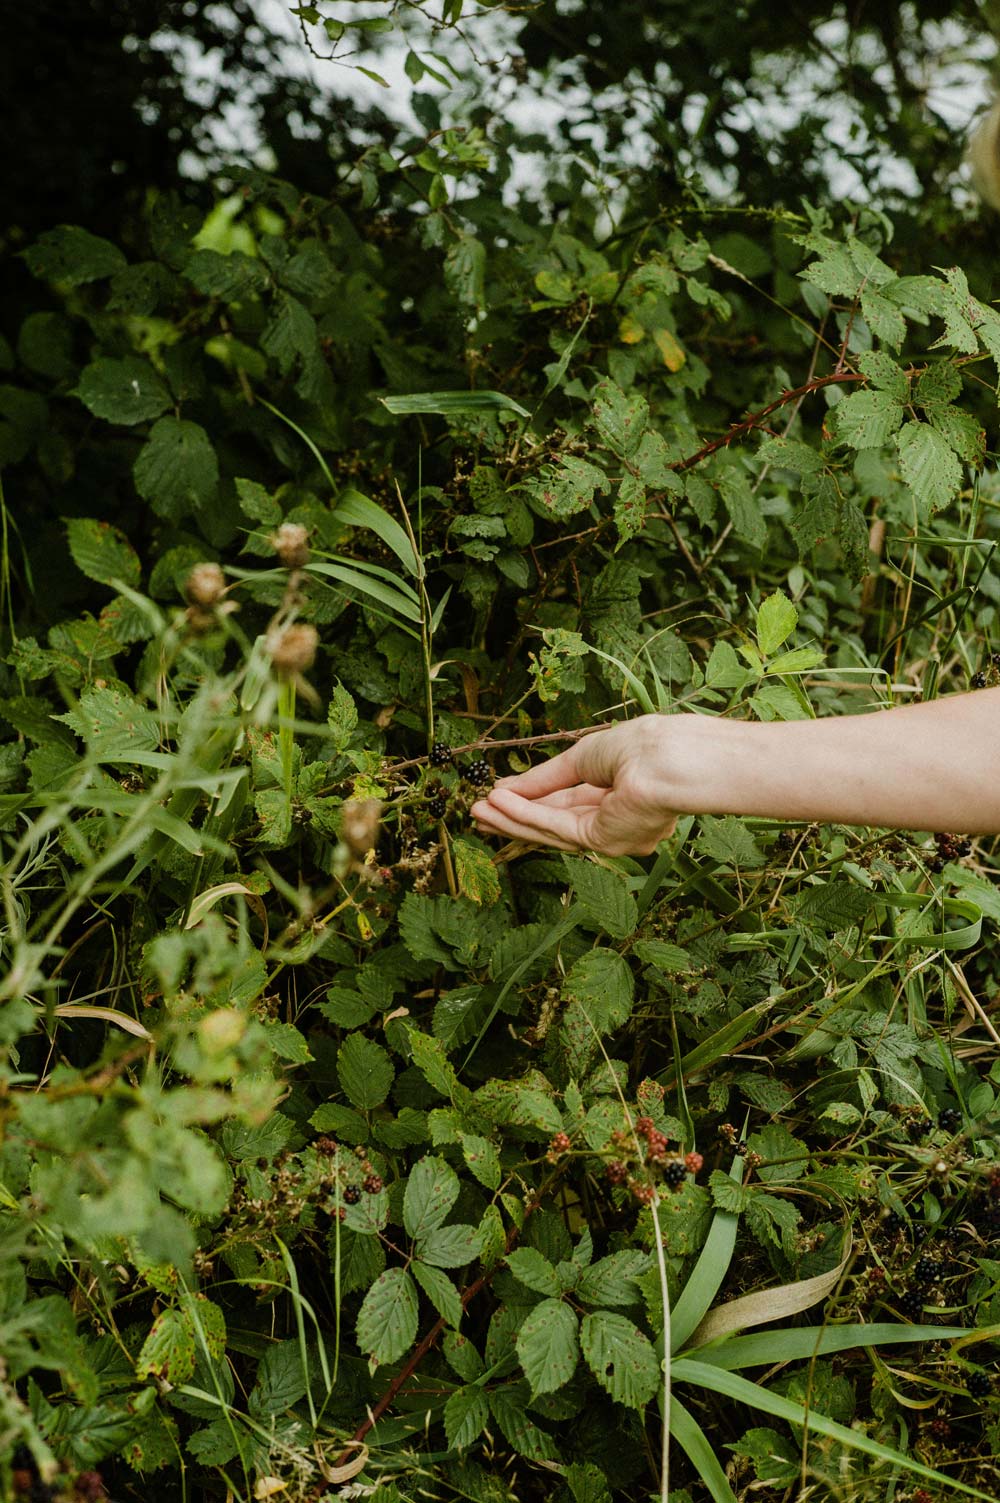 A hand foraging blackberries from a hedgerow